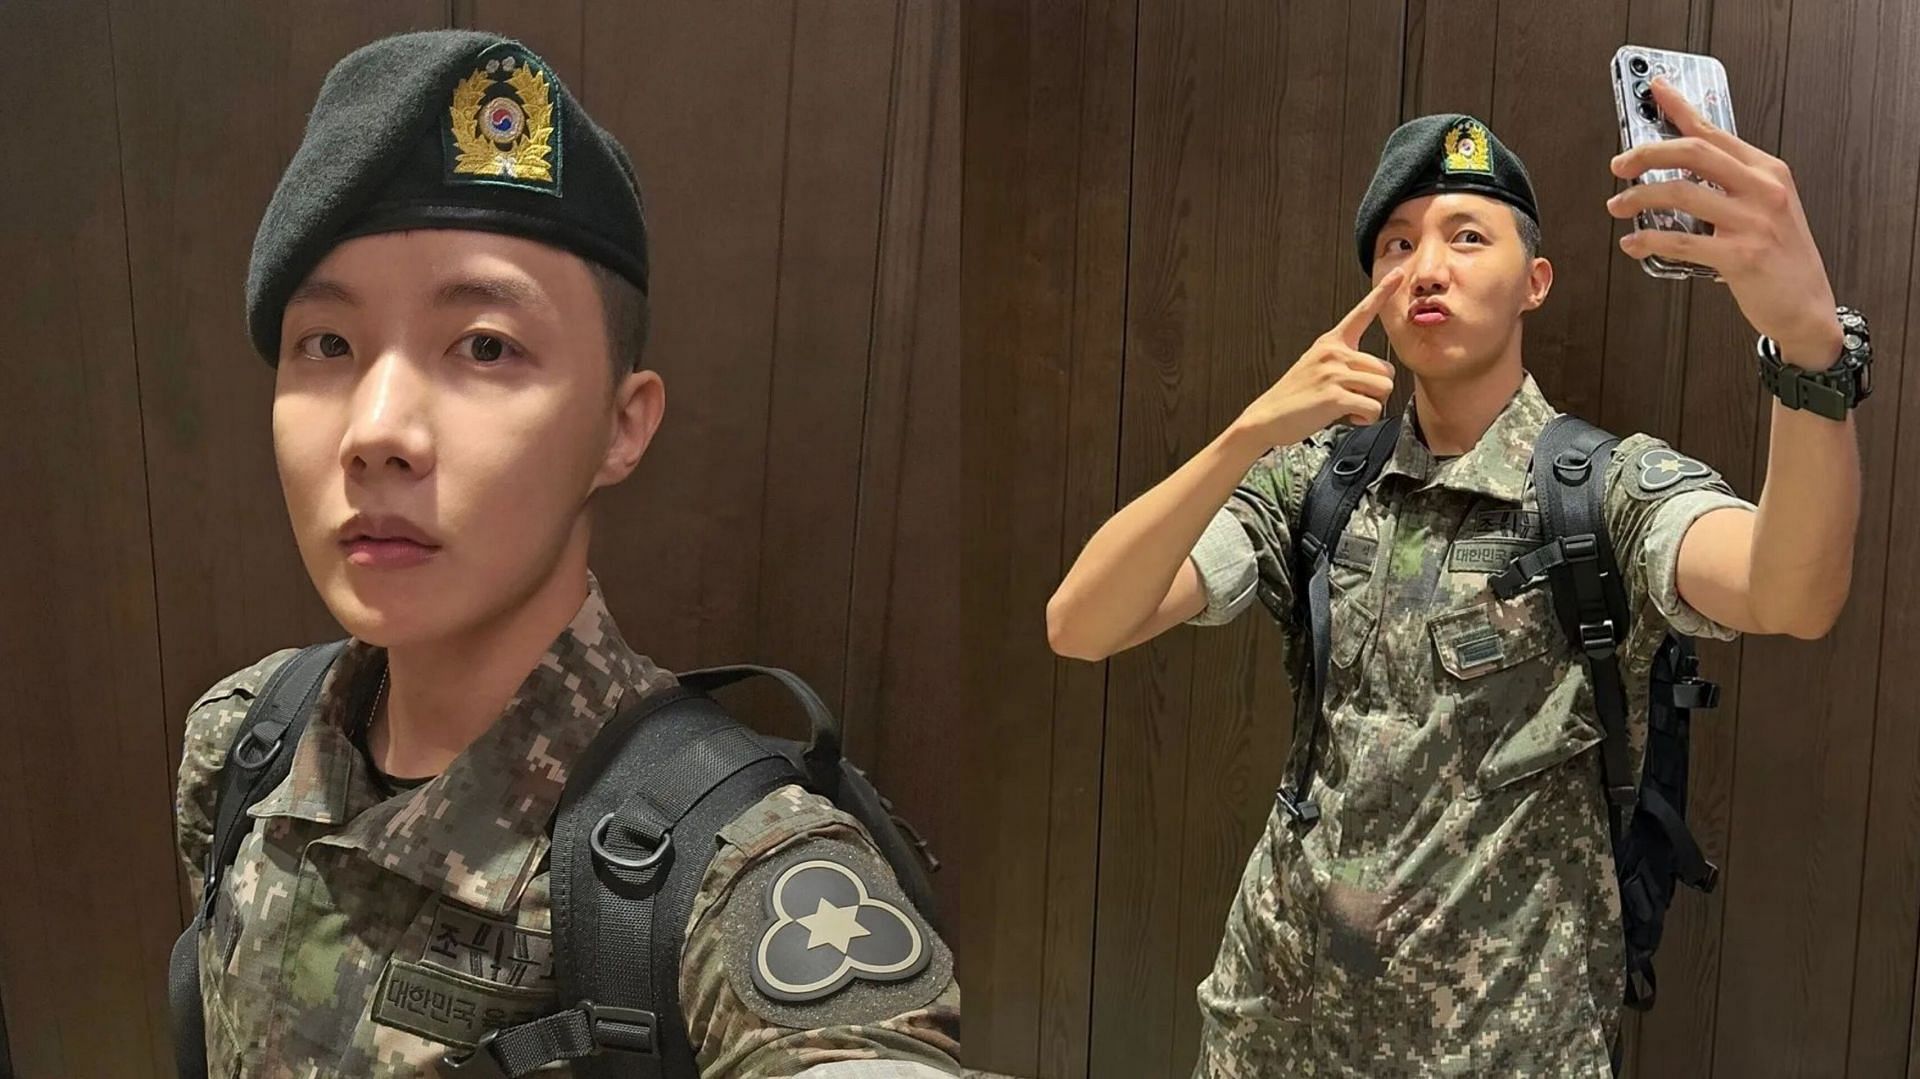 A soldier pens down meeting j-hope in their latest post (Image via Instagram/@uarmyhope)